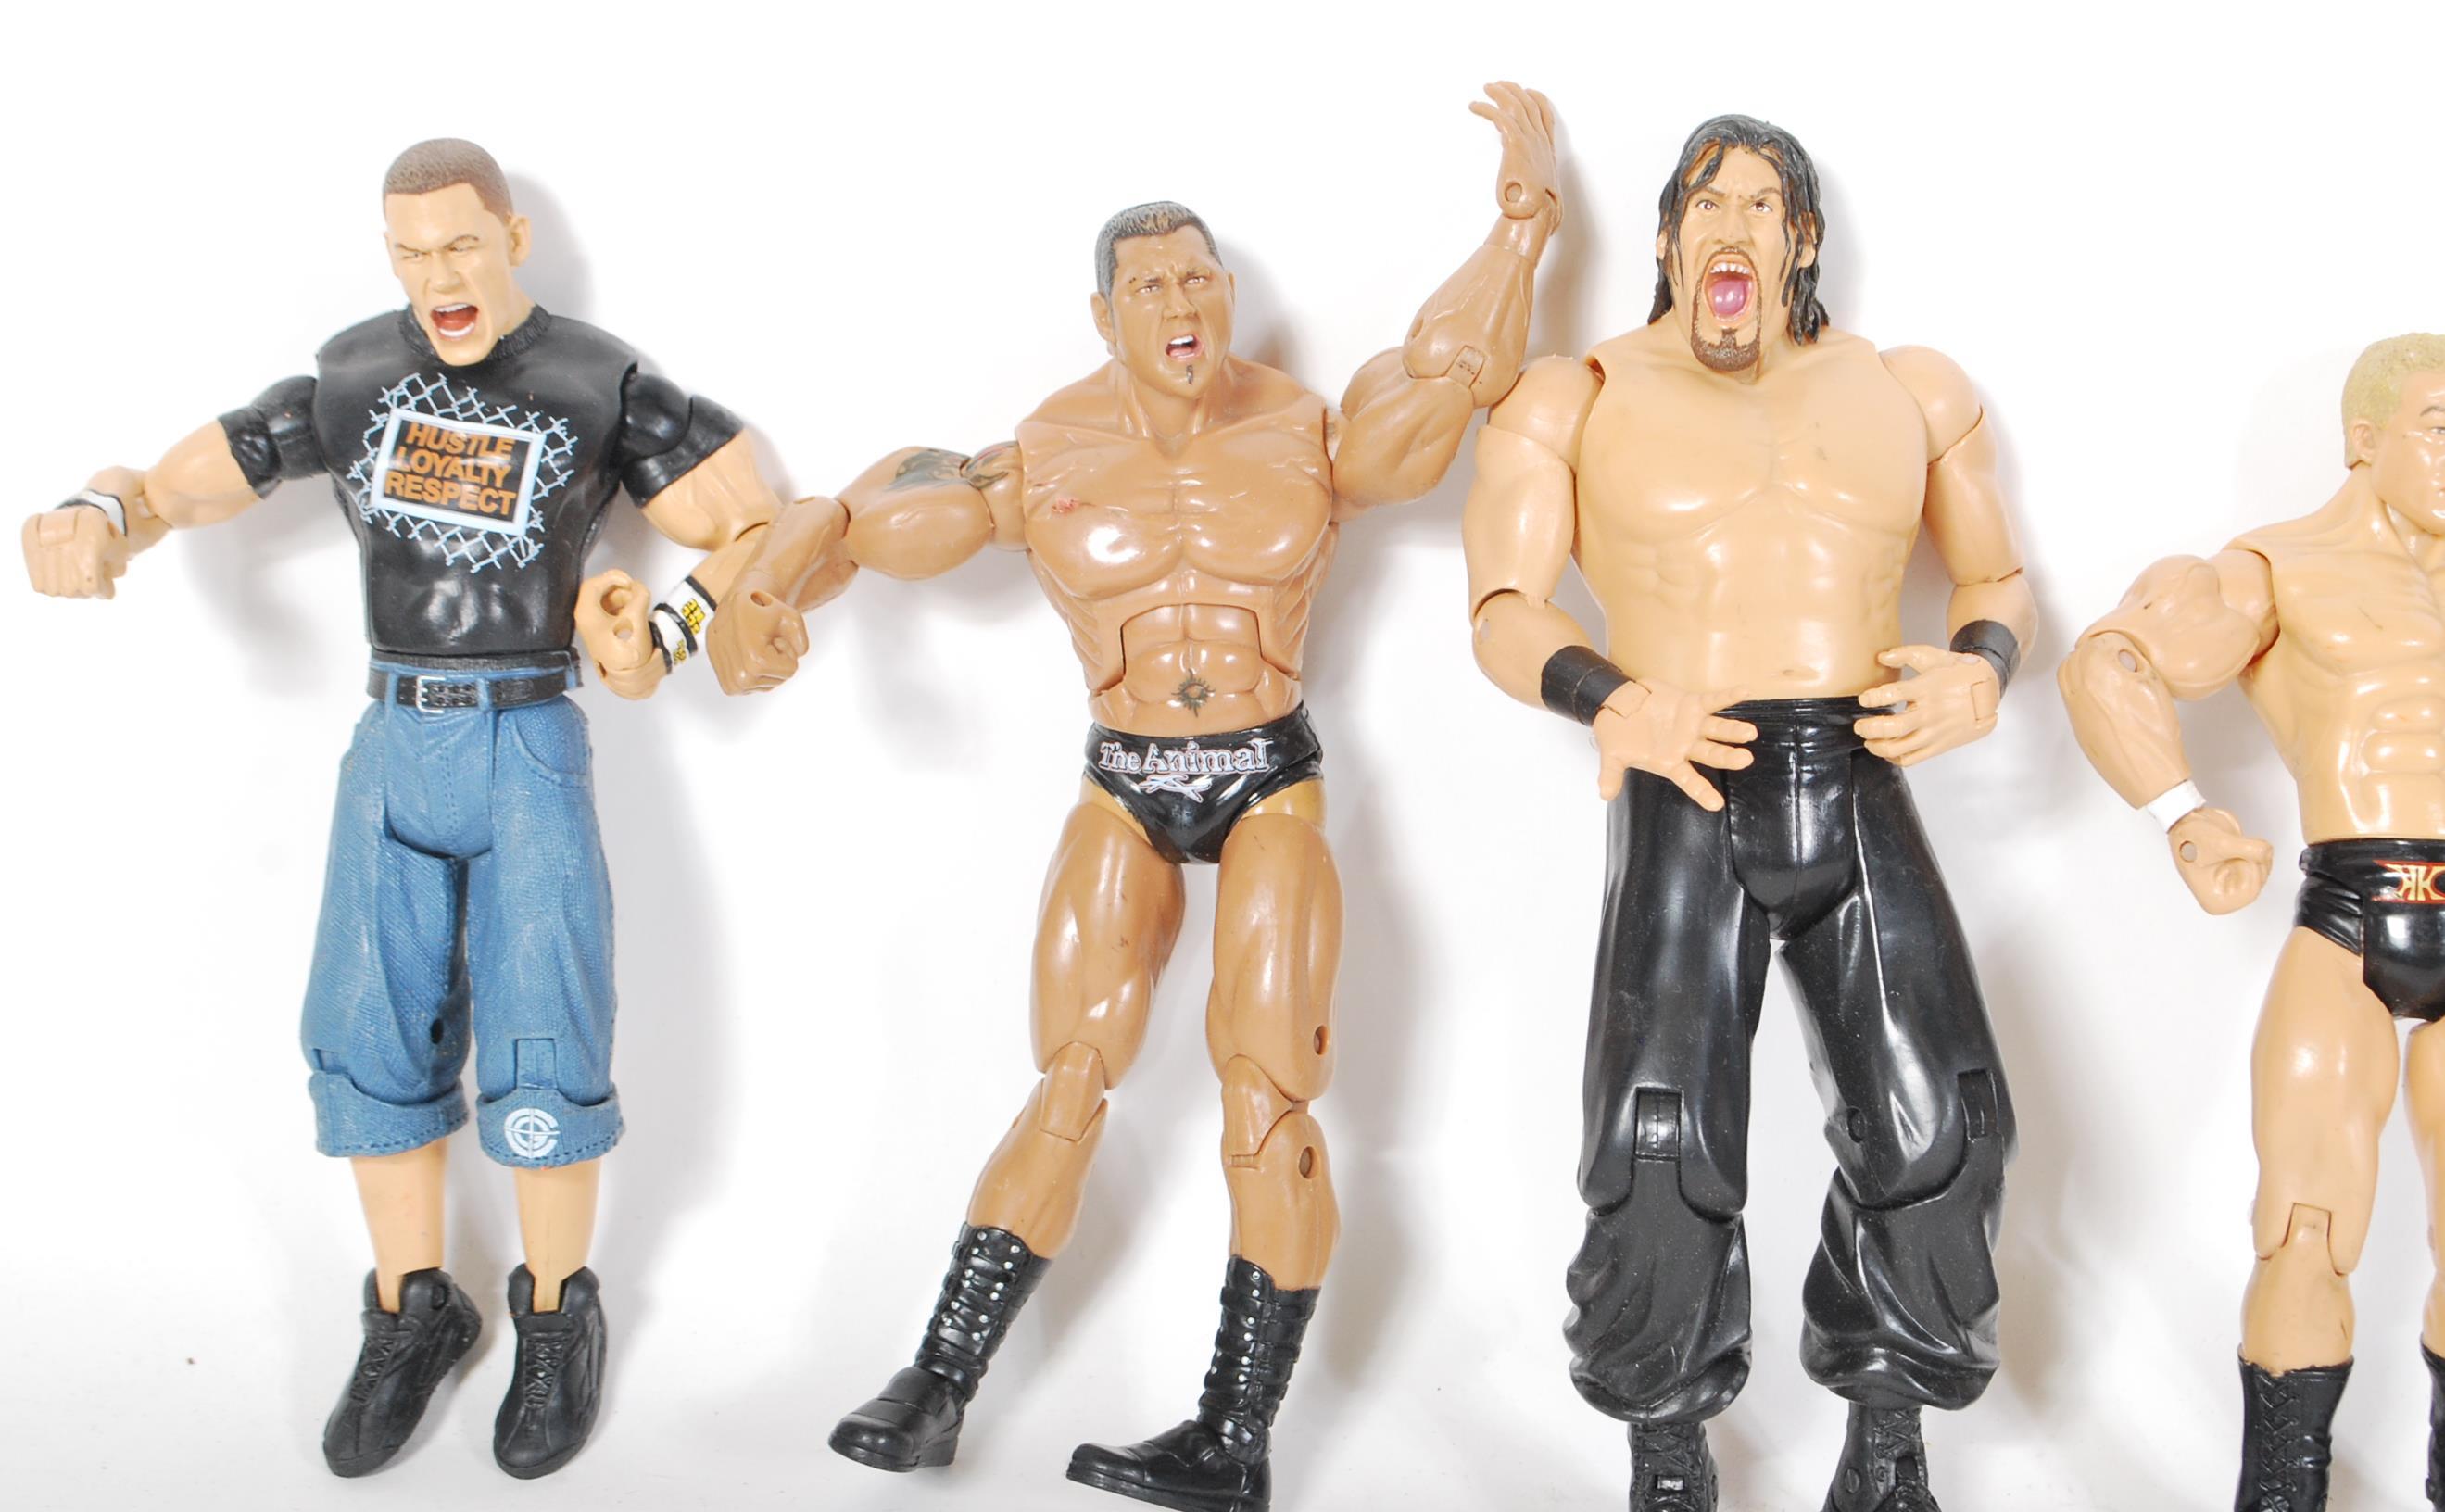 A COLLECTION OF WWE / WWF / ECW ACTION FIGURES BY JAKKS PACIFIC - Image 4 of 5